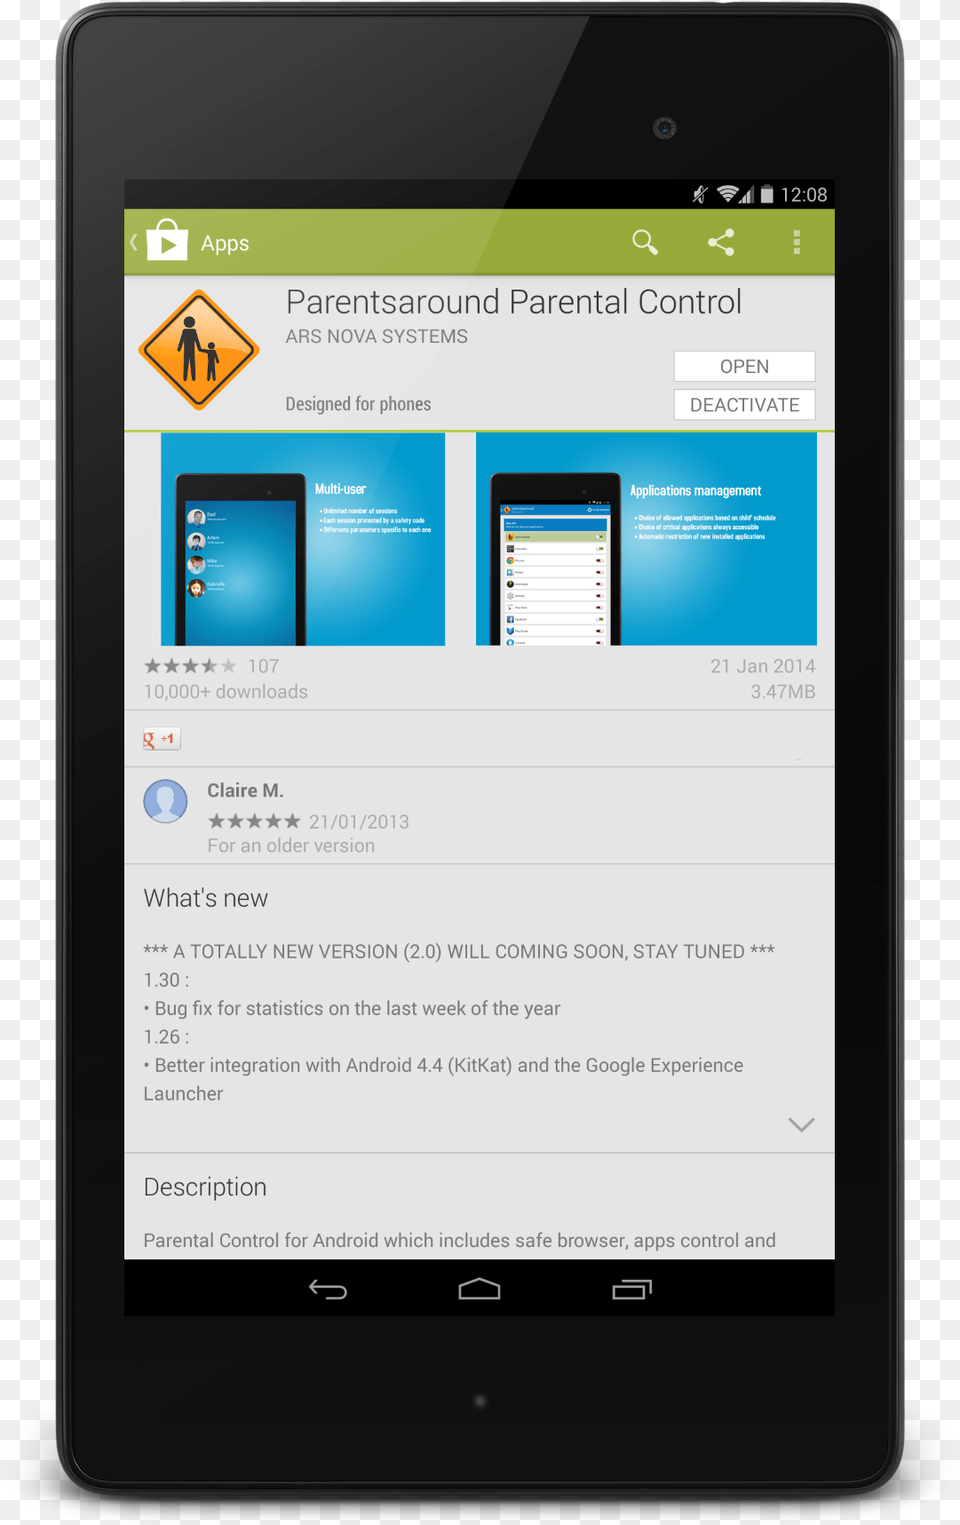 Parentsaround On Google Play Forms In Mobile Apps, Computer, Electronics, Mobile Phone, Phone Png Image